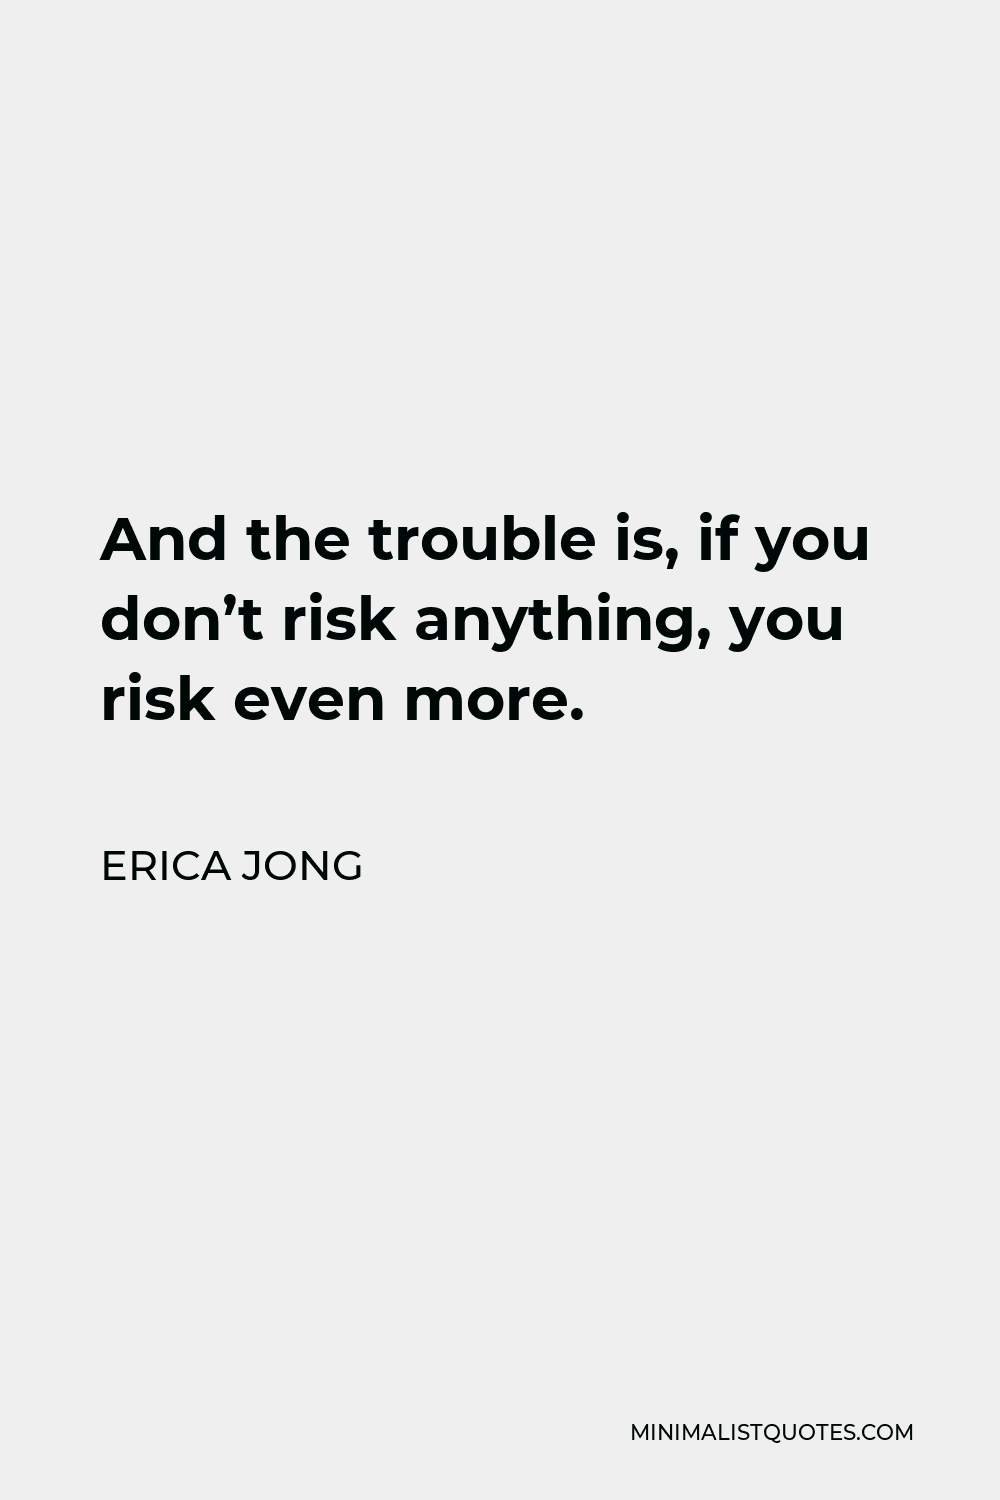 Erica Jong Quote - And the trouble is, if you don’t risk anything, you risk even more.